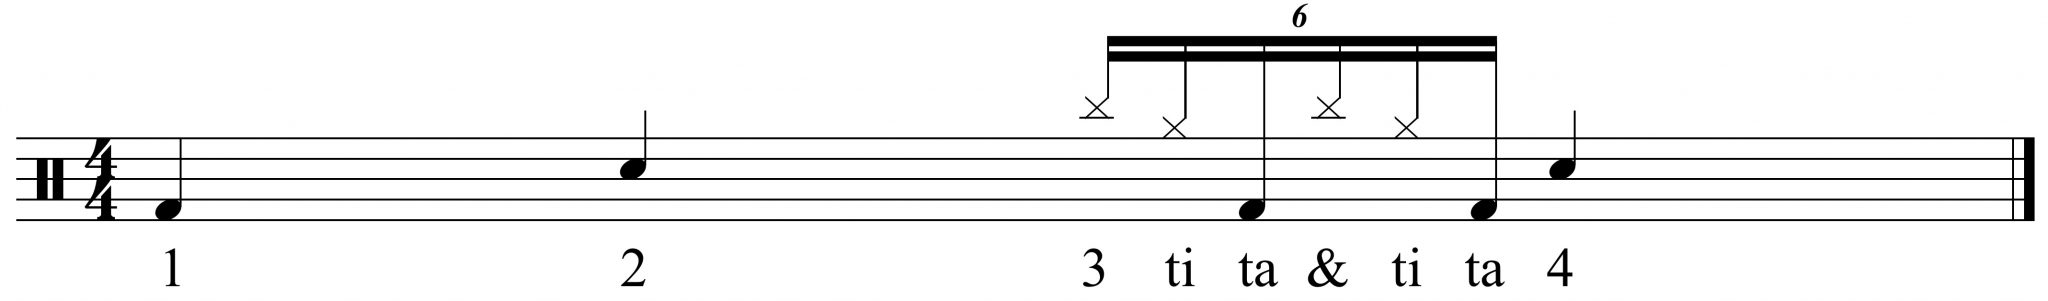 exercise to get used to the 16th note triplets. 